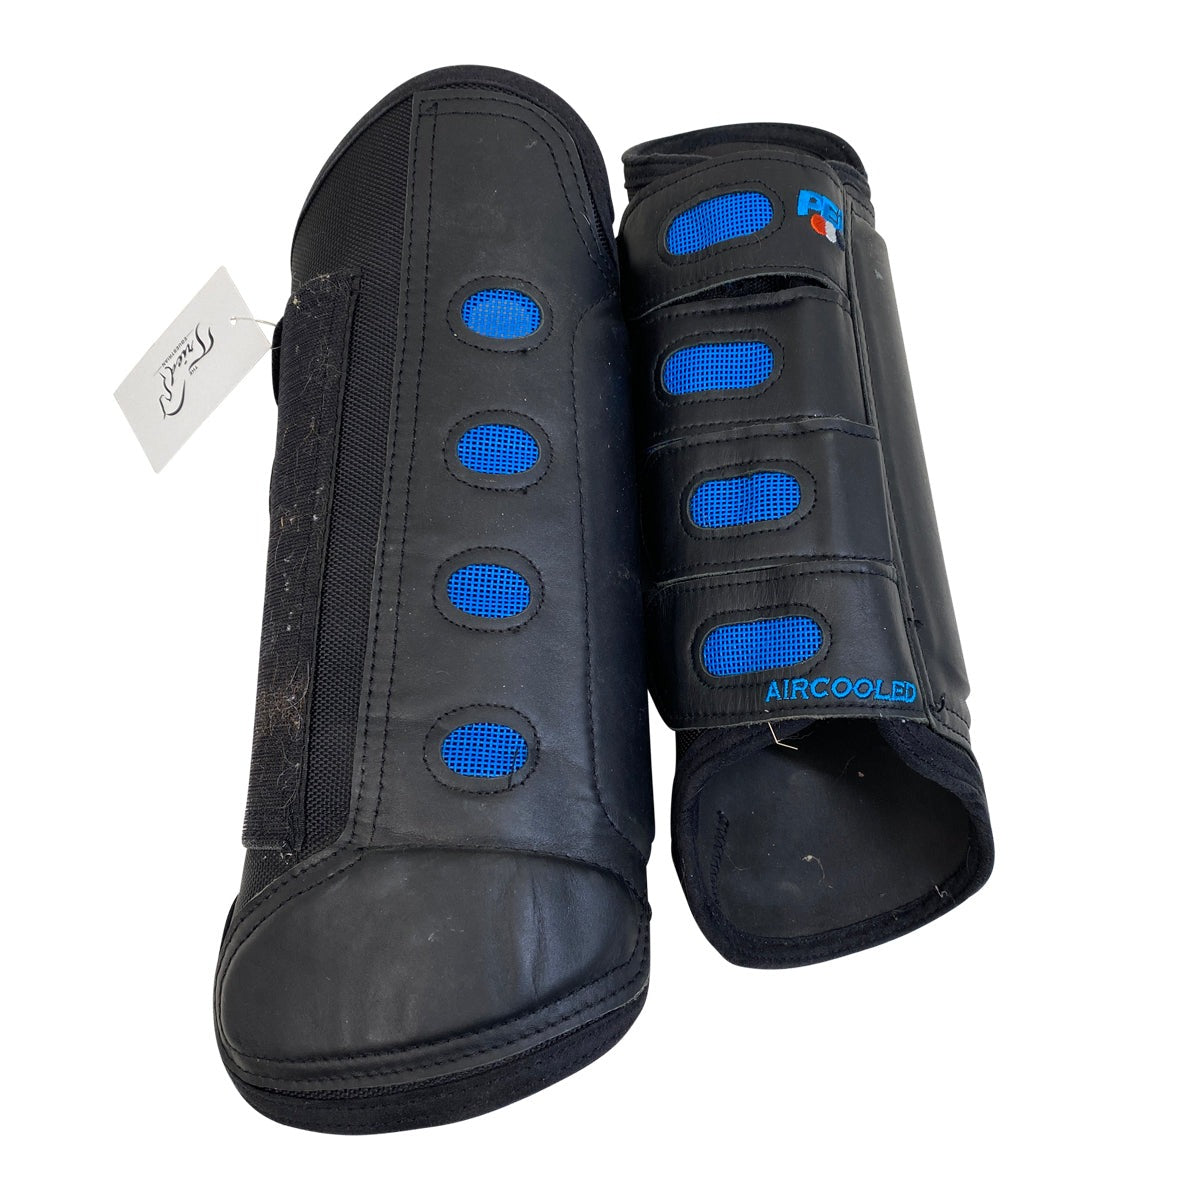 Premier Equine Air Cooled Original Eventing Boots-Hind in Black w/Blue